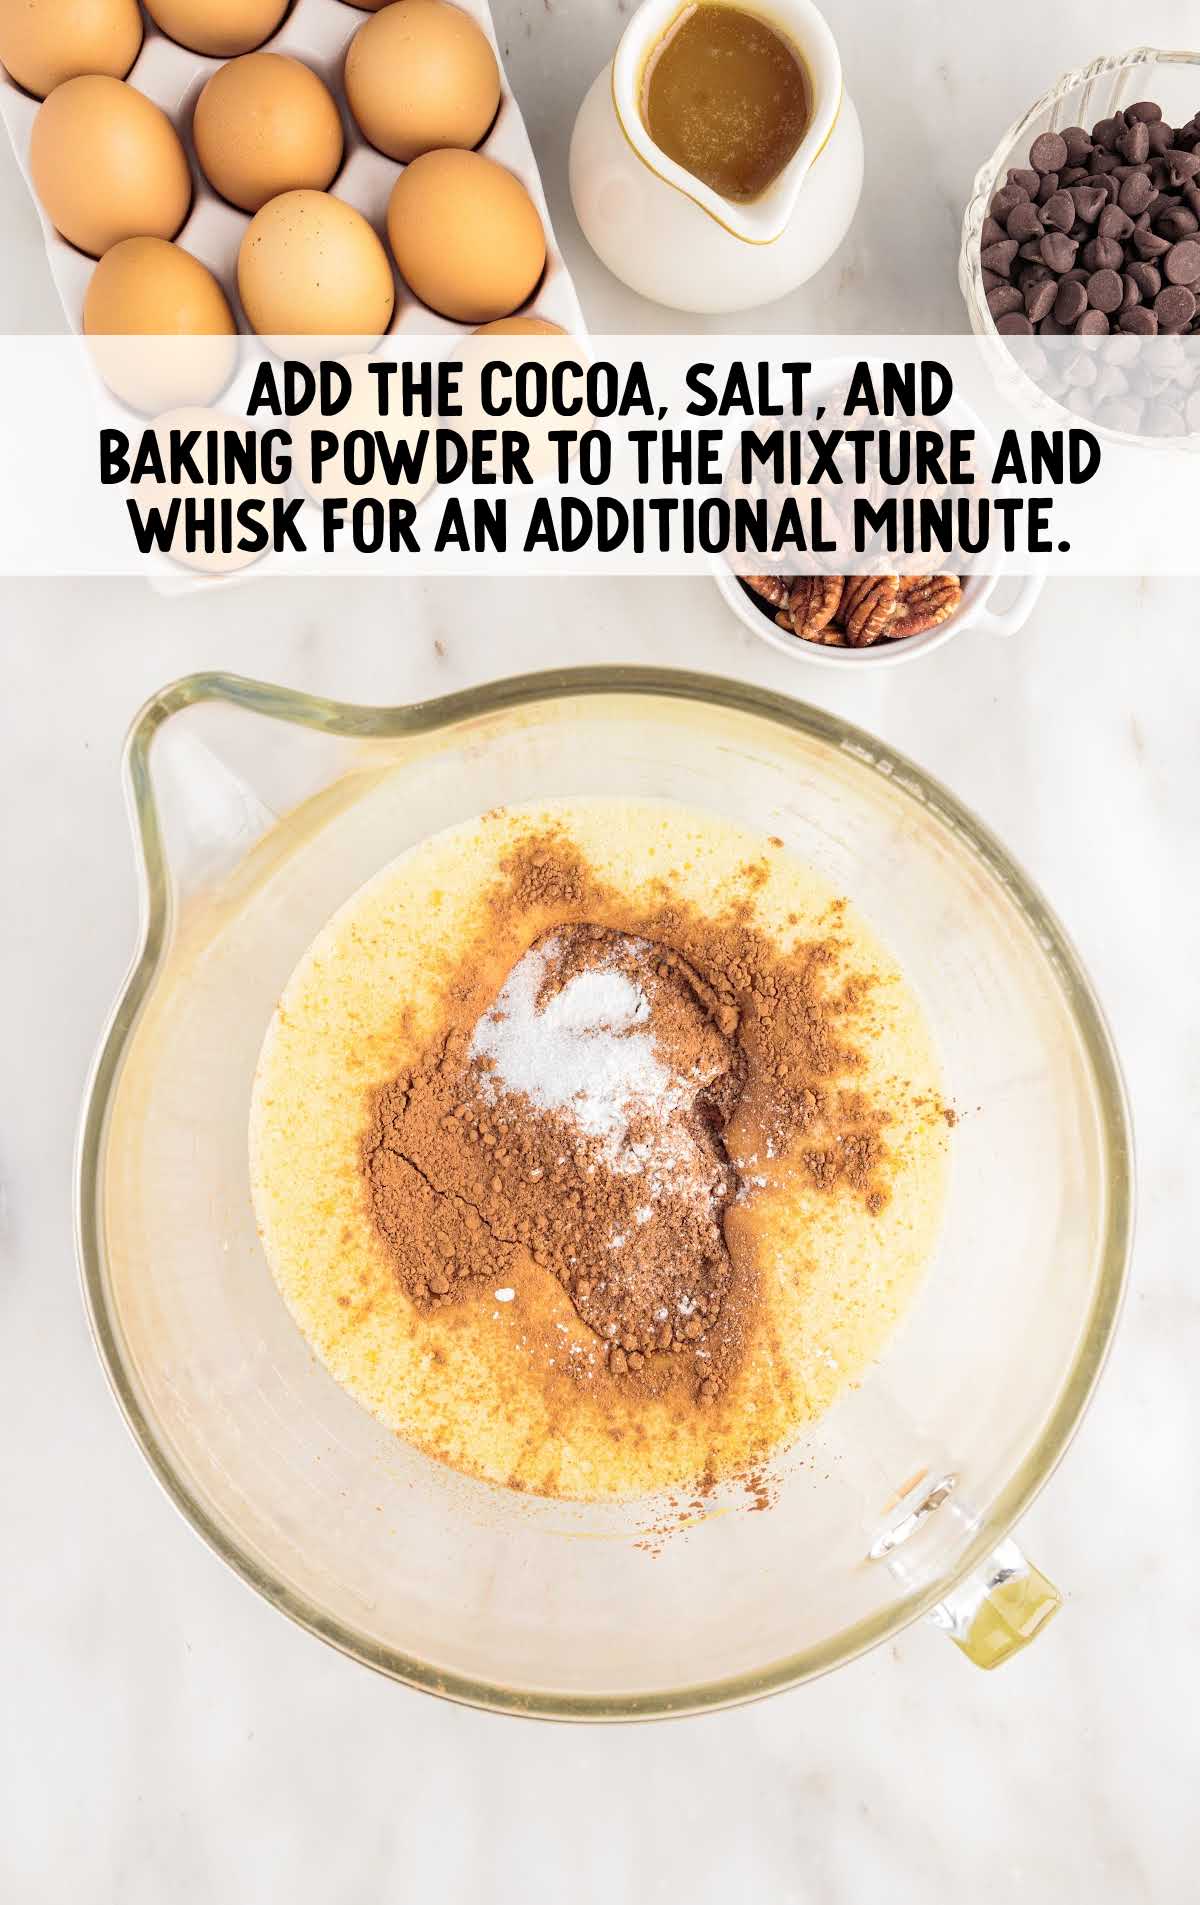 cocoa, salt, and baking powder added to the mixture